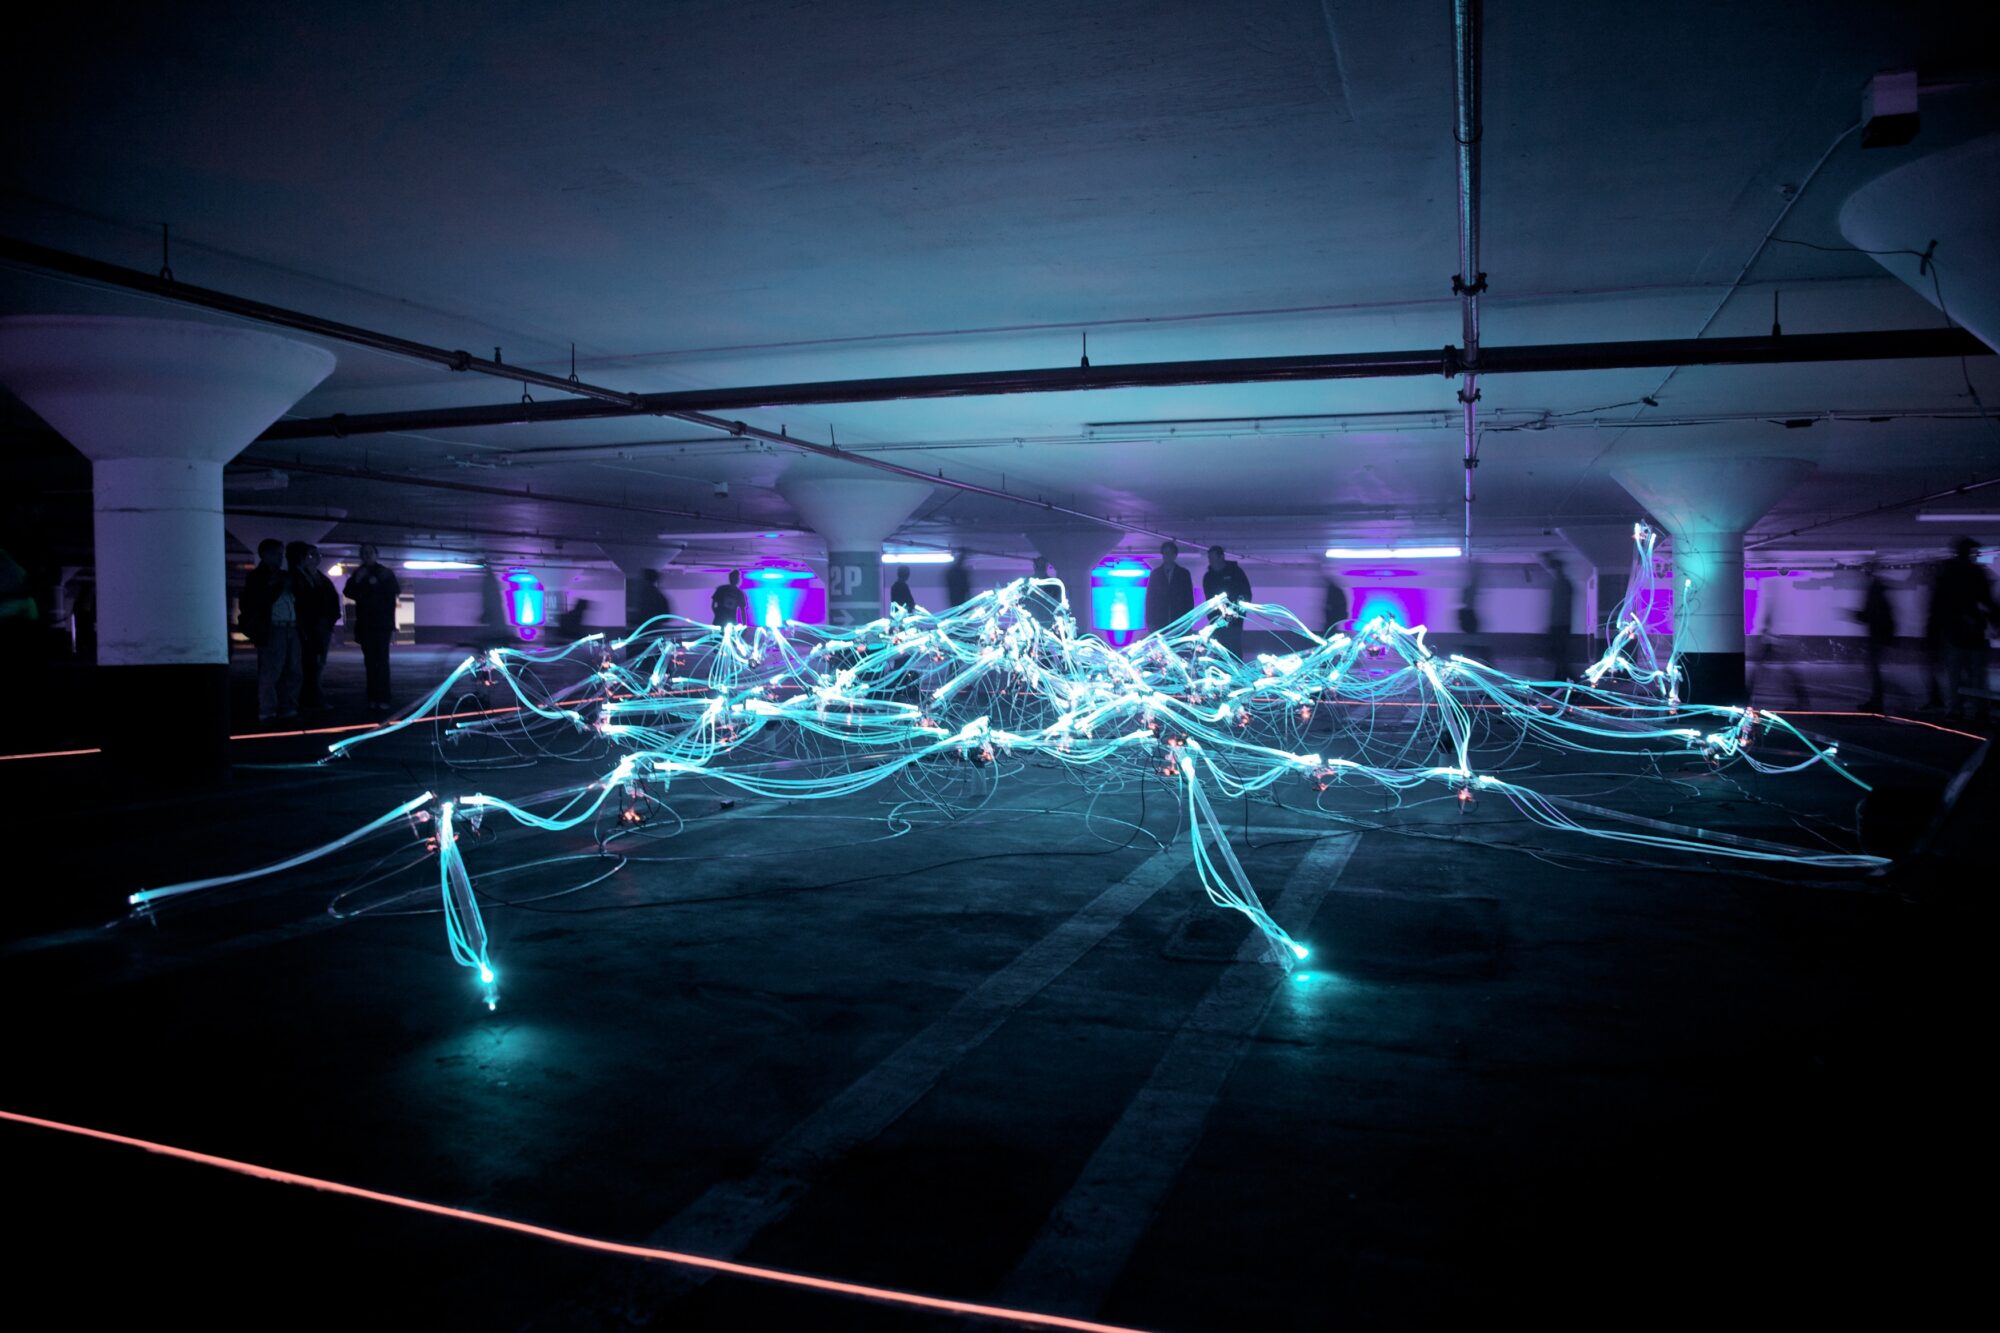 An image of neon light mapping in a large open space